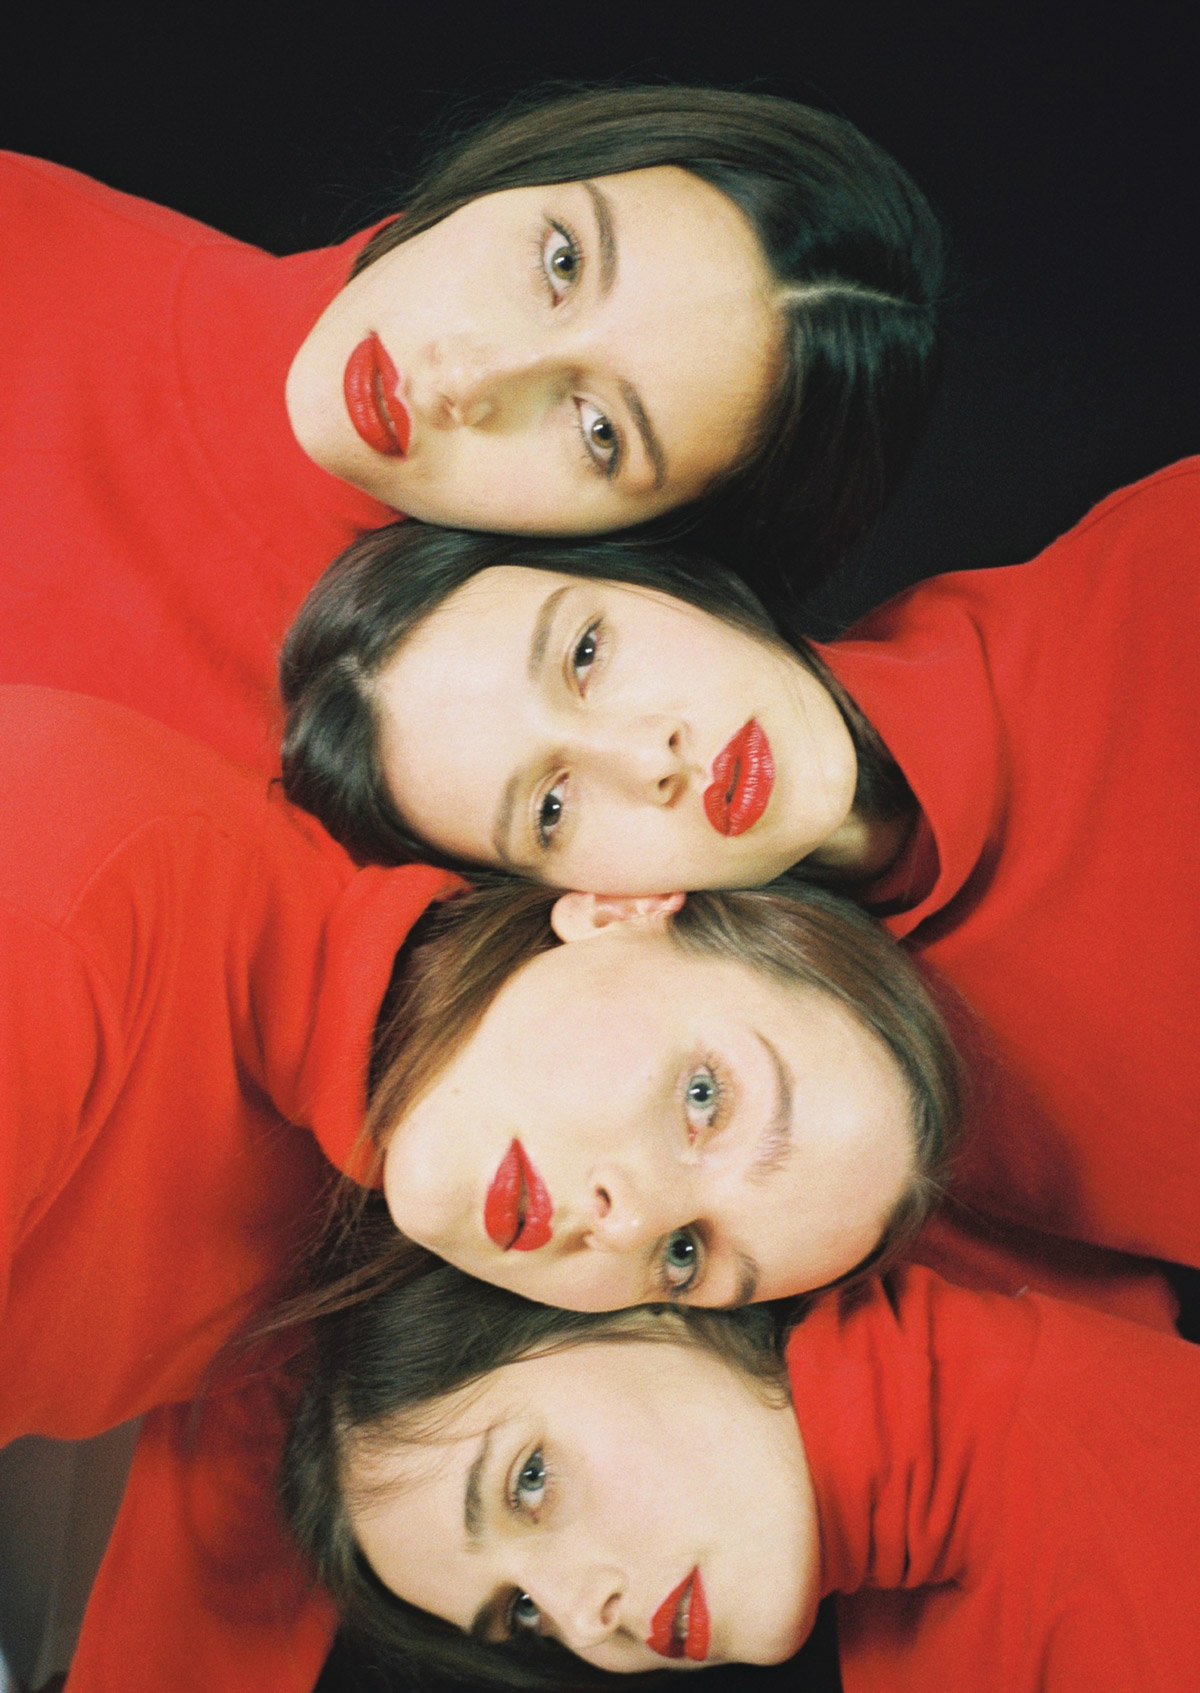 German Girls by Ophelie Rondeau